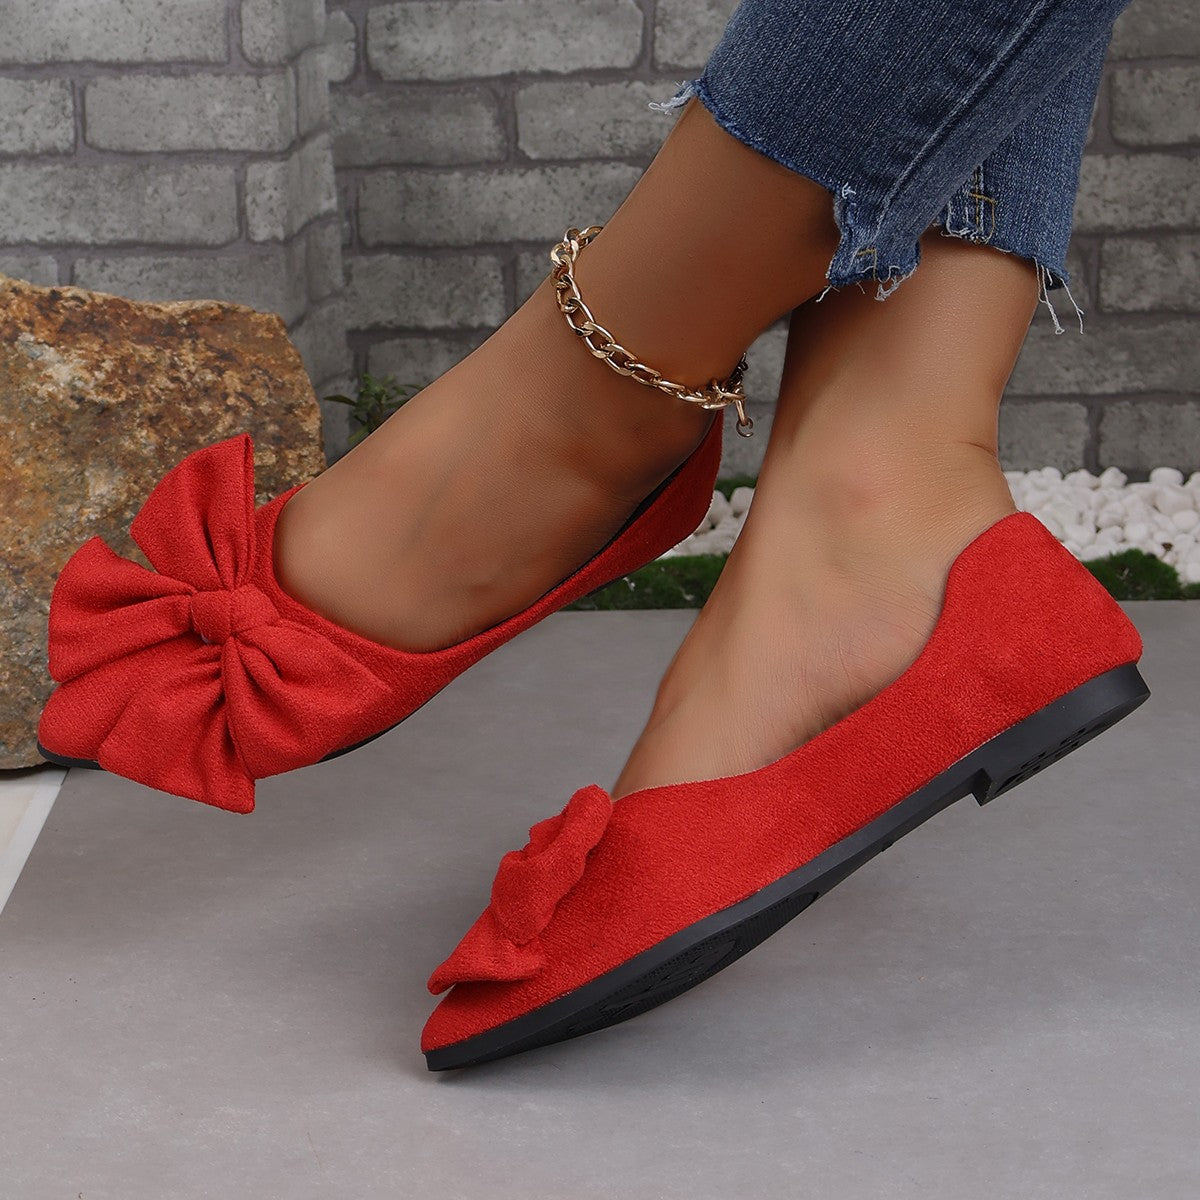 Big Bow Flat Shoes Pointed-toe Low-heeled Shoes Women Fashion Casual Breathable Slip On Flats